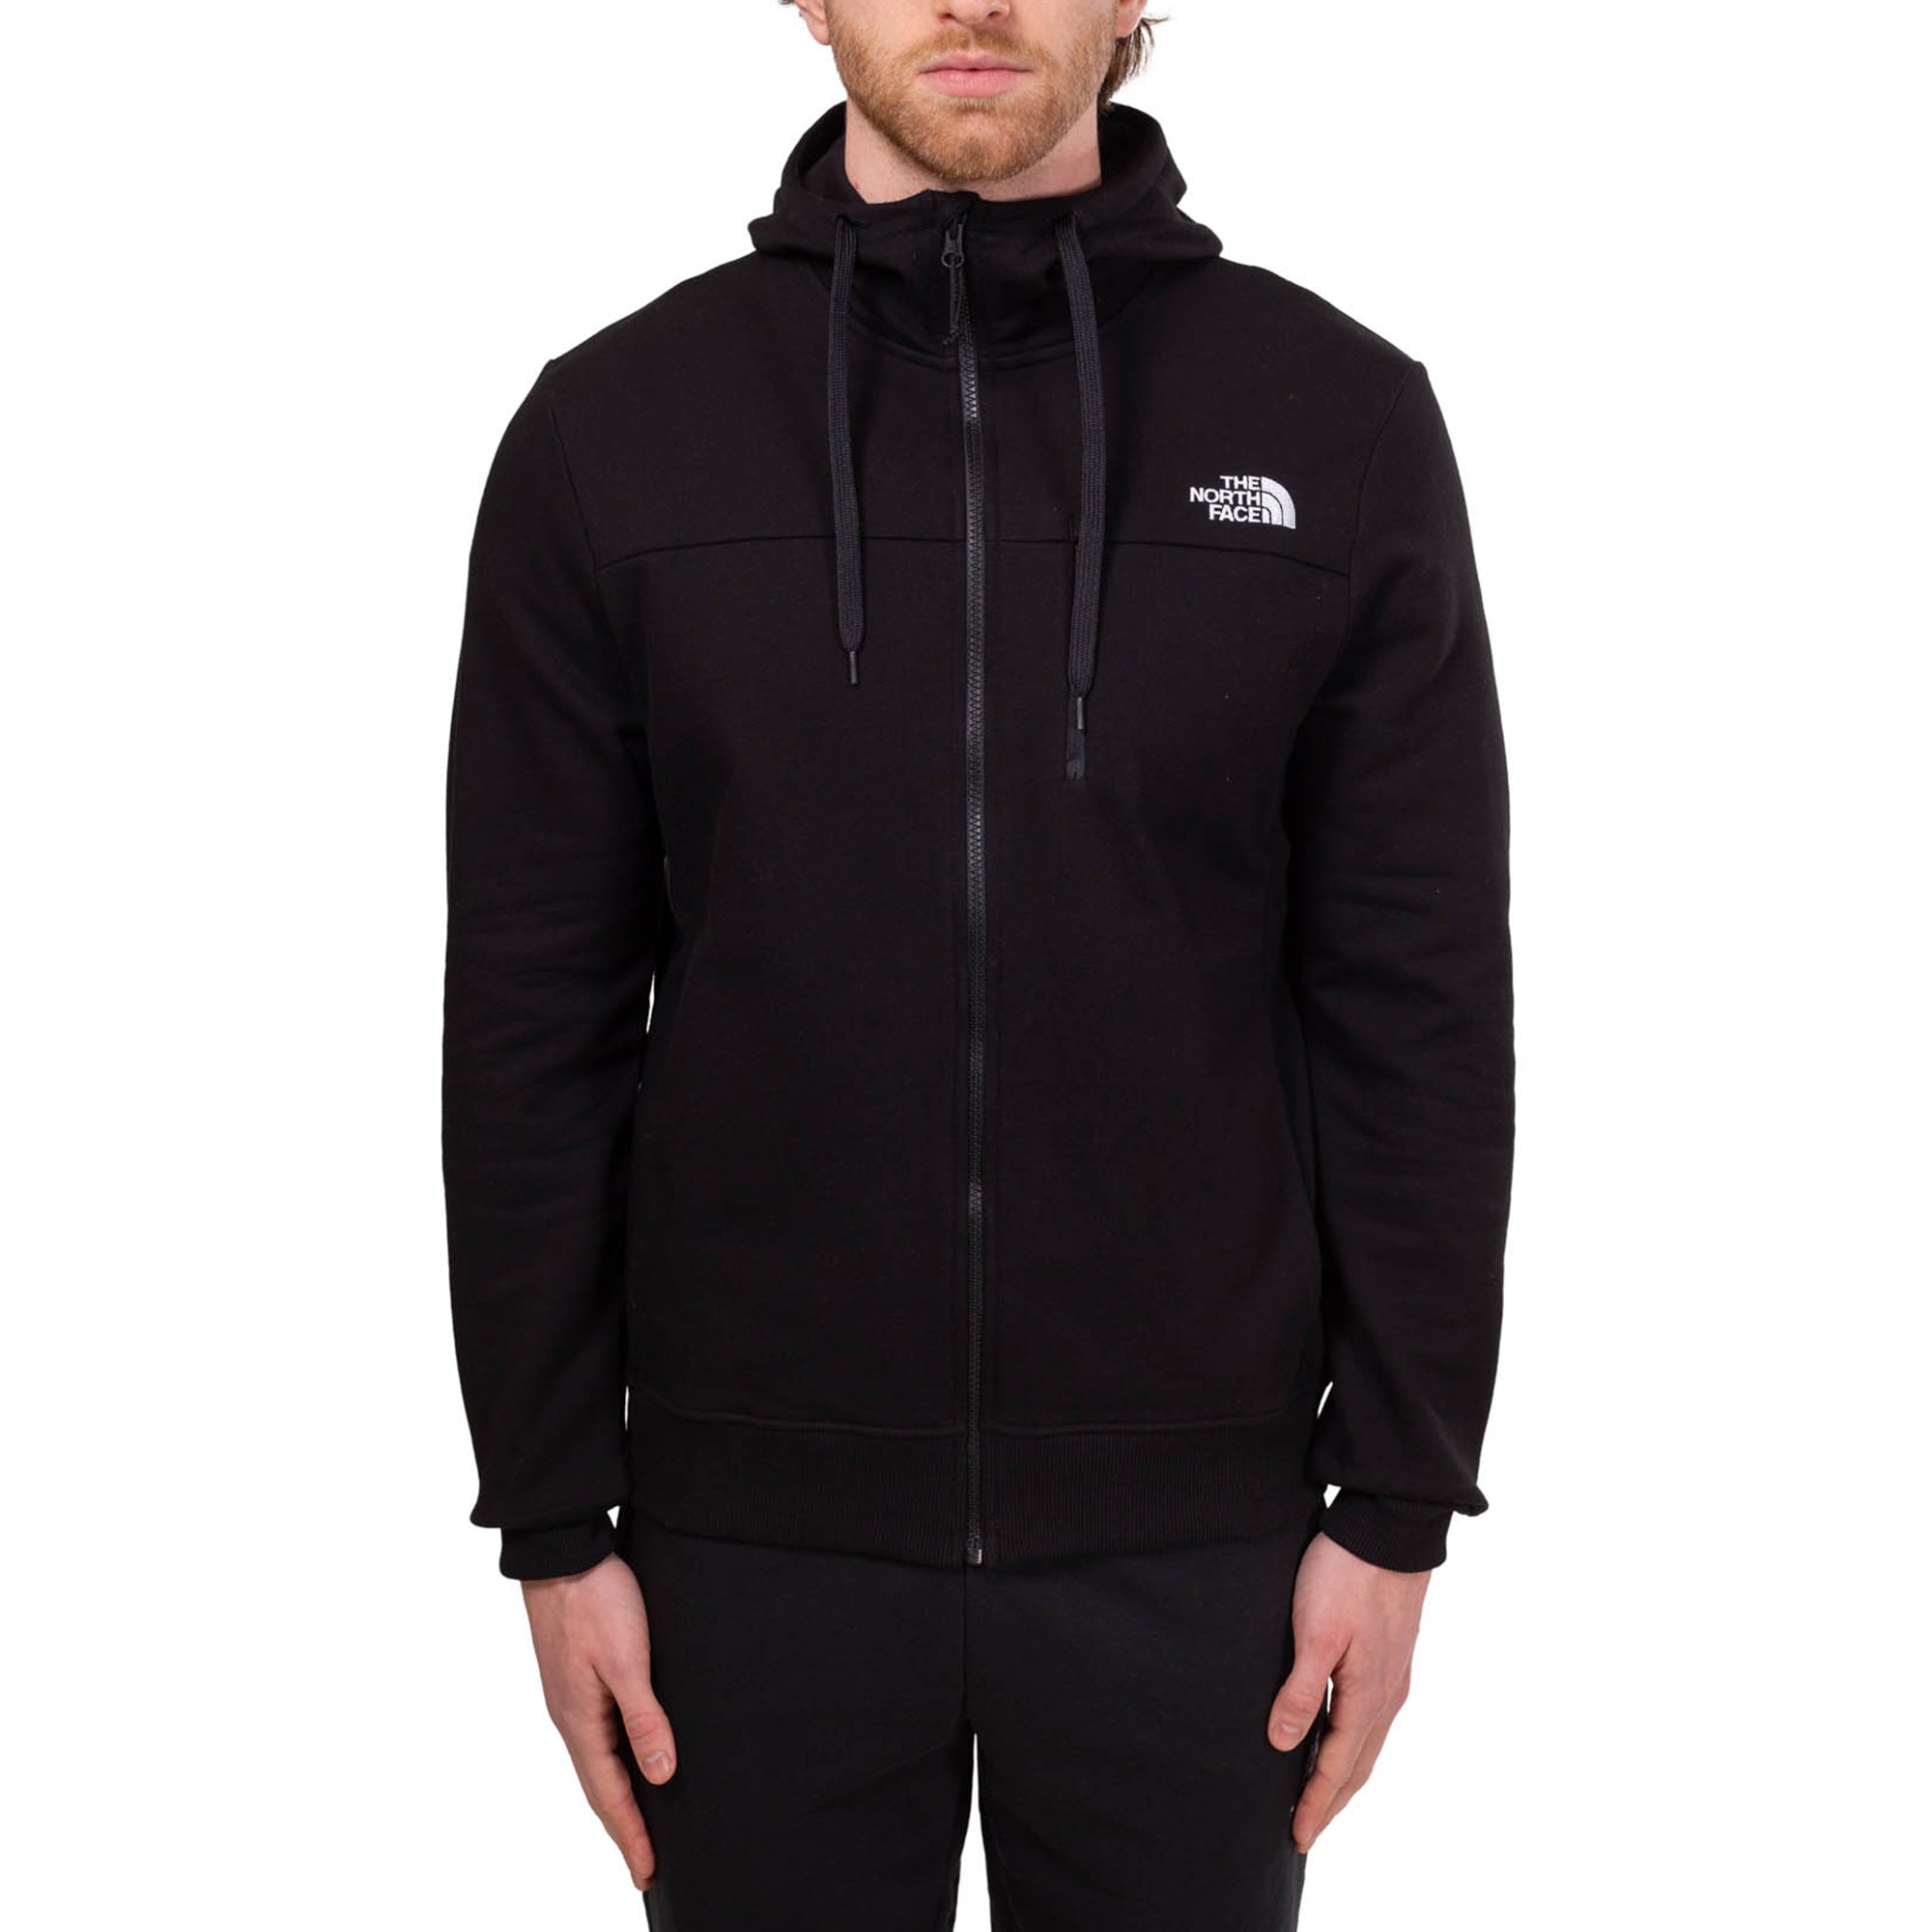 the lord of the rings: war in the north The North Face Zip Hoodie Black